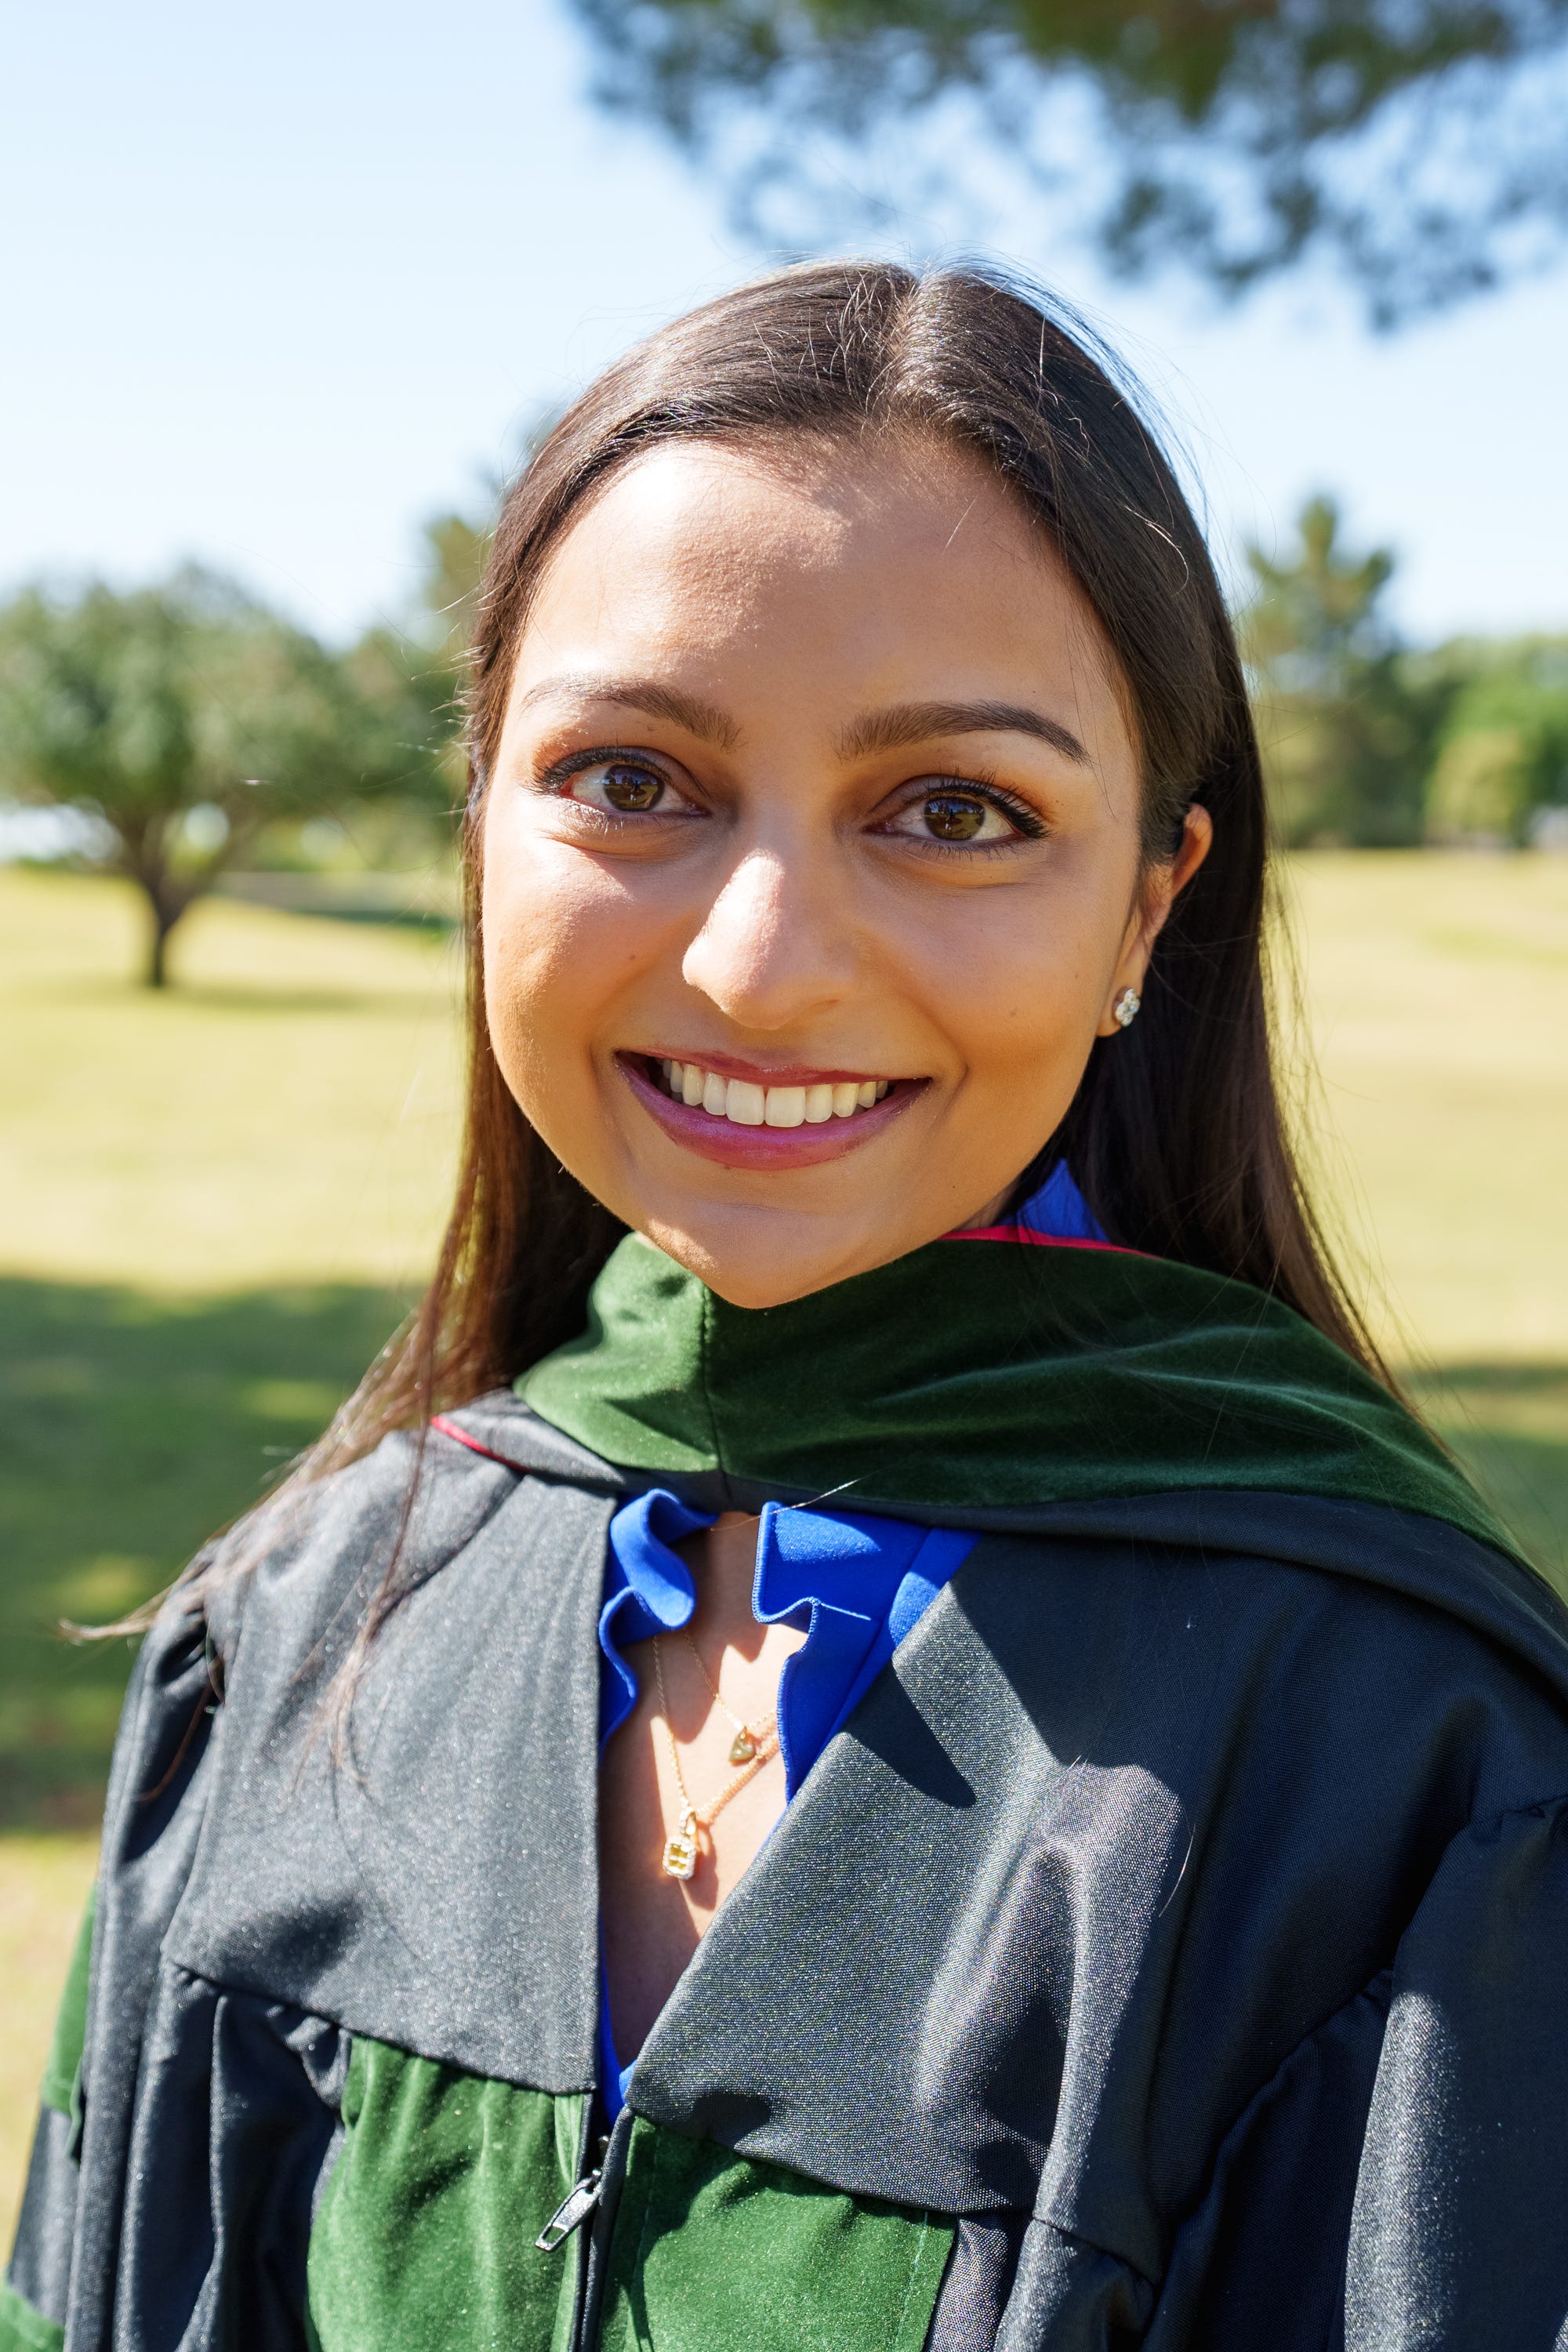 Maya Patel poses for a photo at a park near her home in Scottsdale on May 7, 2022. Maya will graduate from University of Arizona's Phoenix medical school as a doctor of medicine.